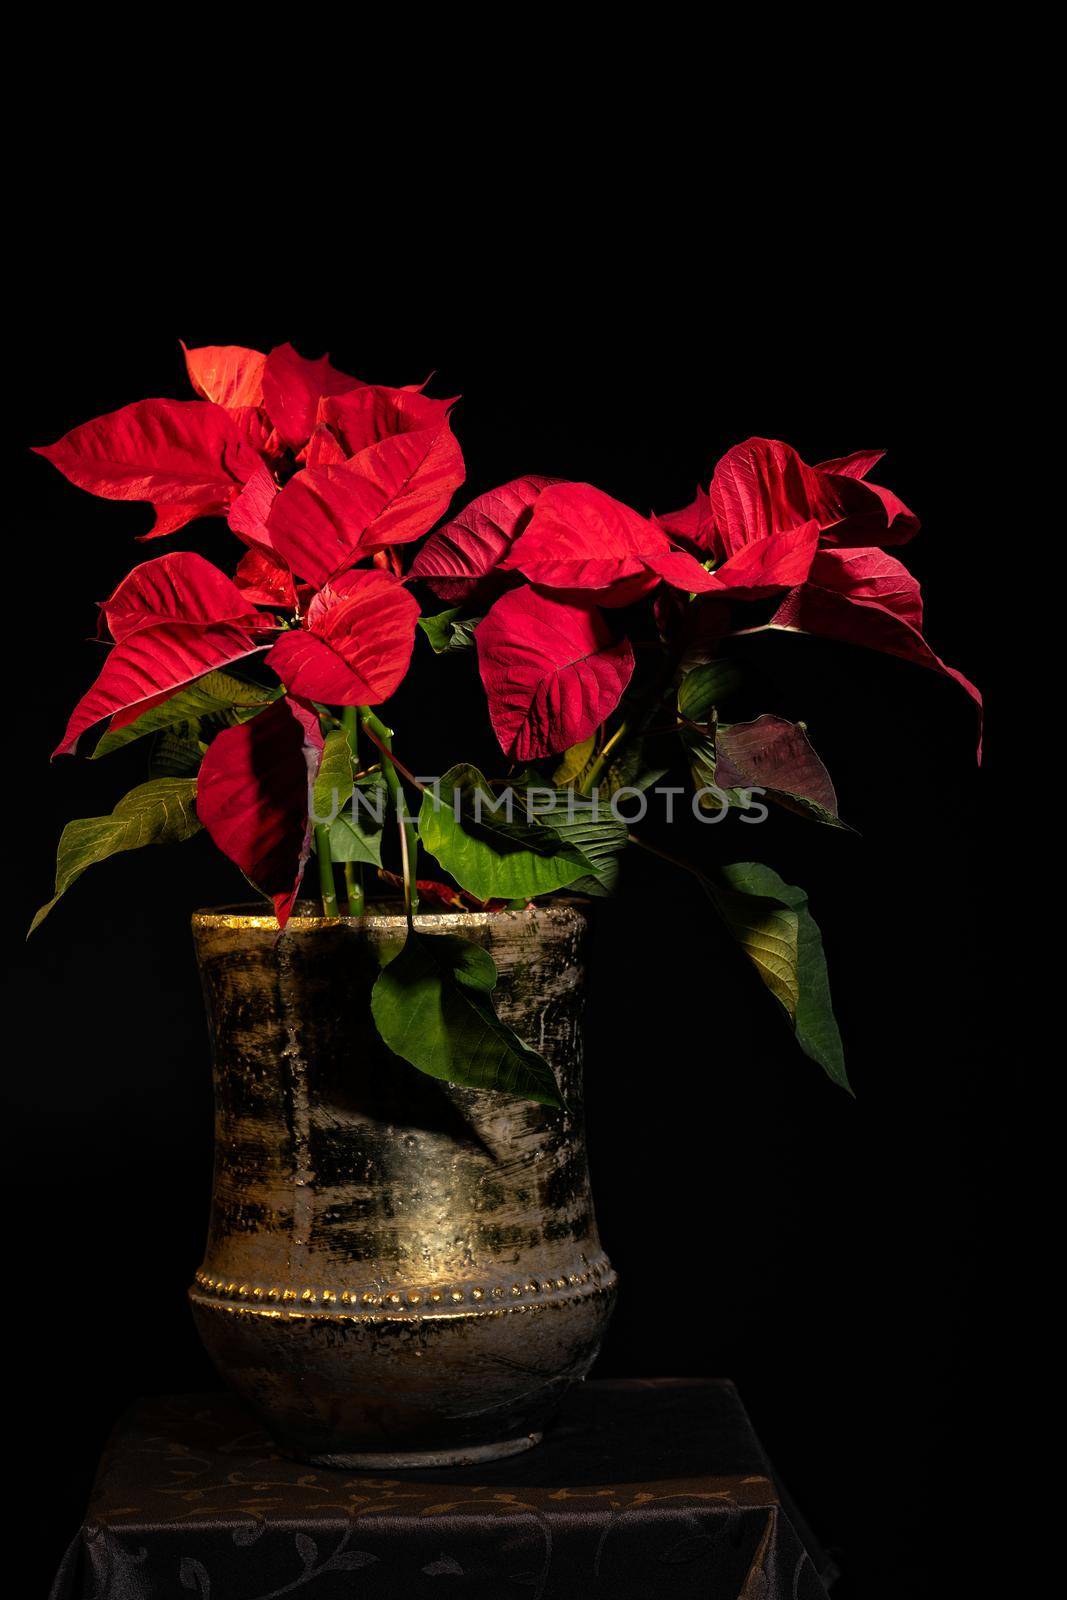 A beautifully blooming poinsettia in a brass vase against a black background.